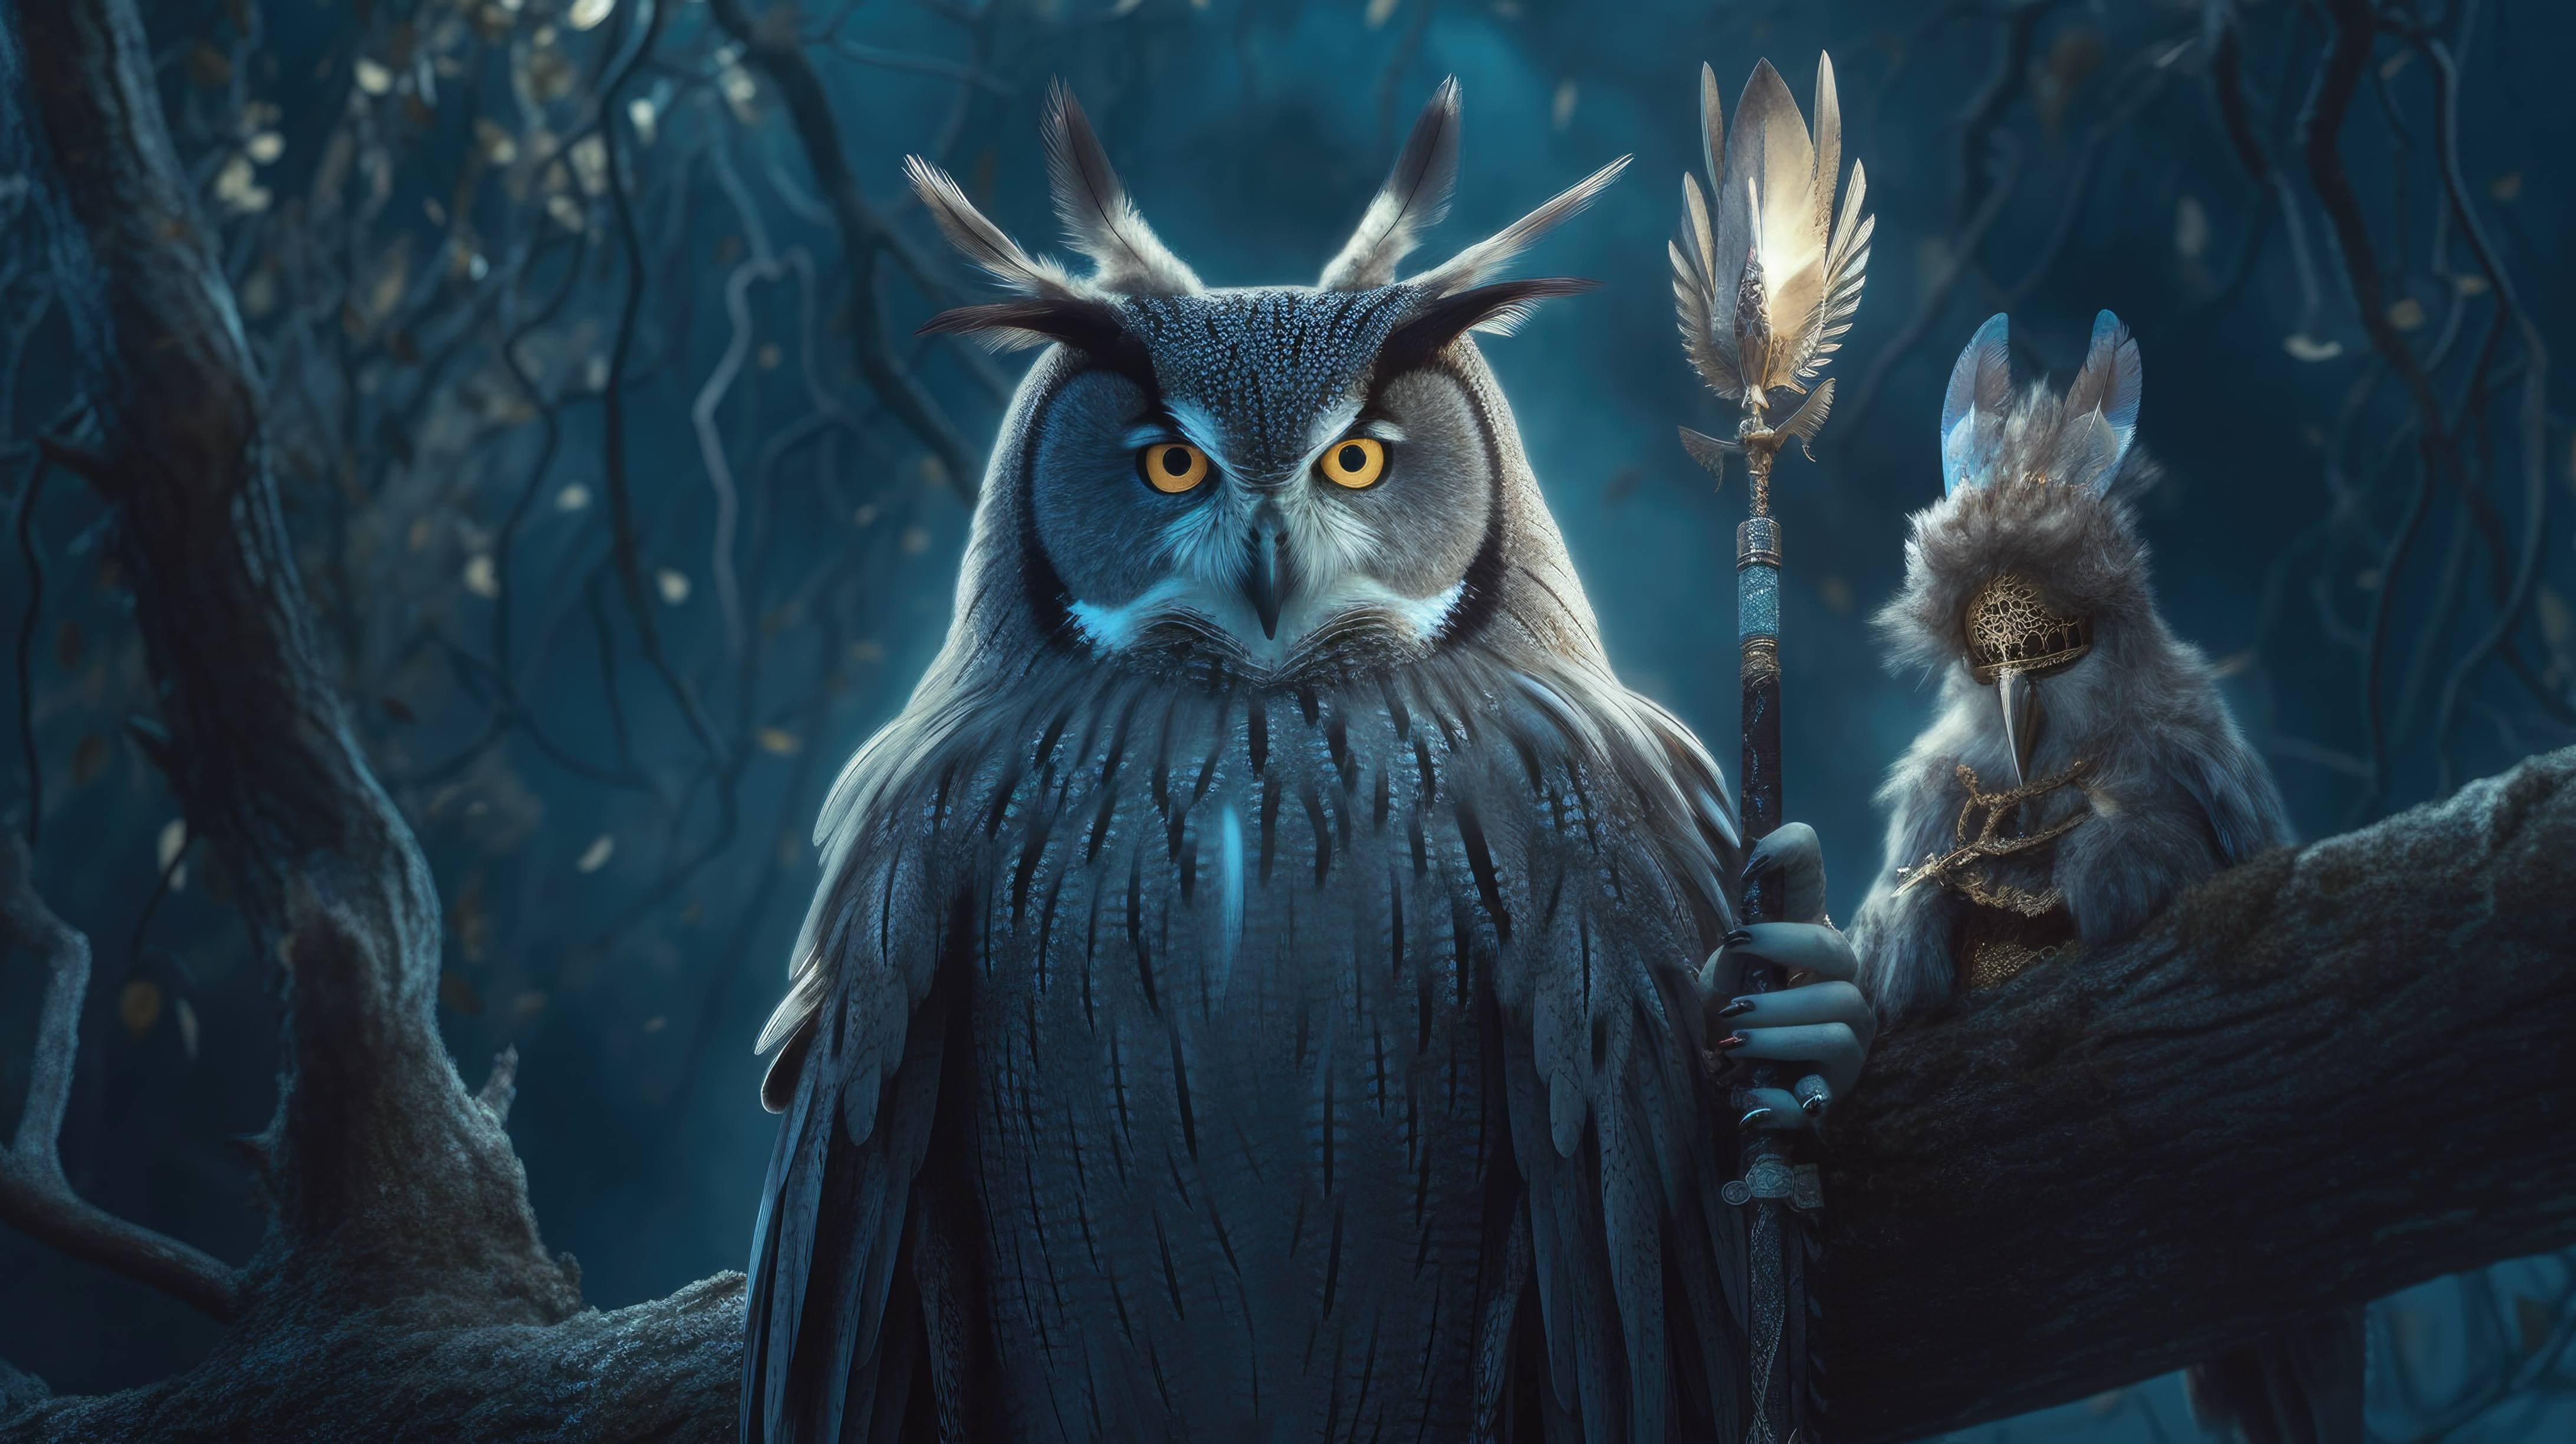 A 4K ultra HD wallpaper of a stylish owl wearing a feathered cape and a silver mask, perched on a moonlit branch in a mystical forest, surrounded by other animals dressed in